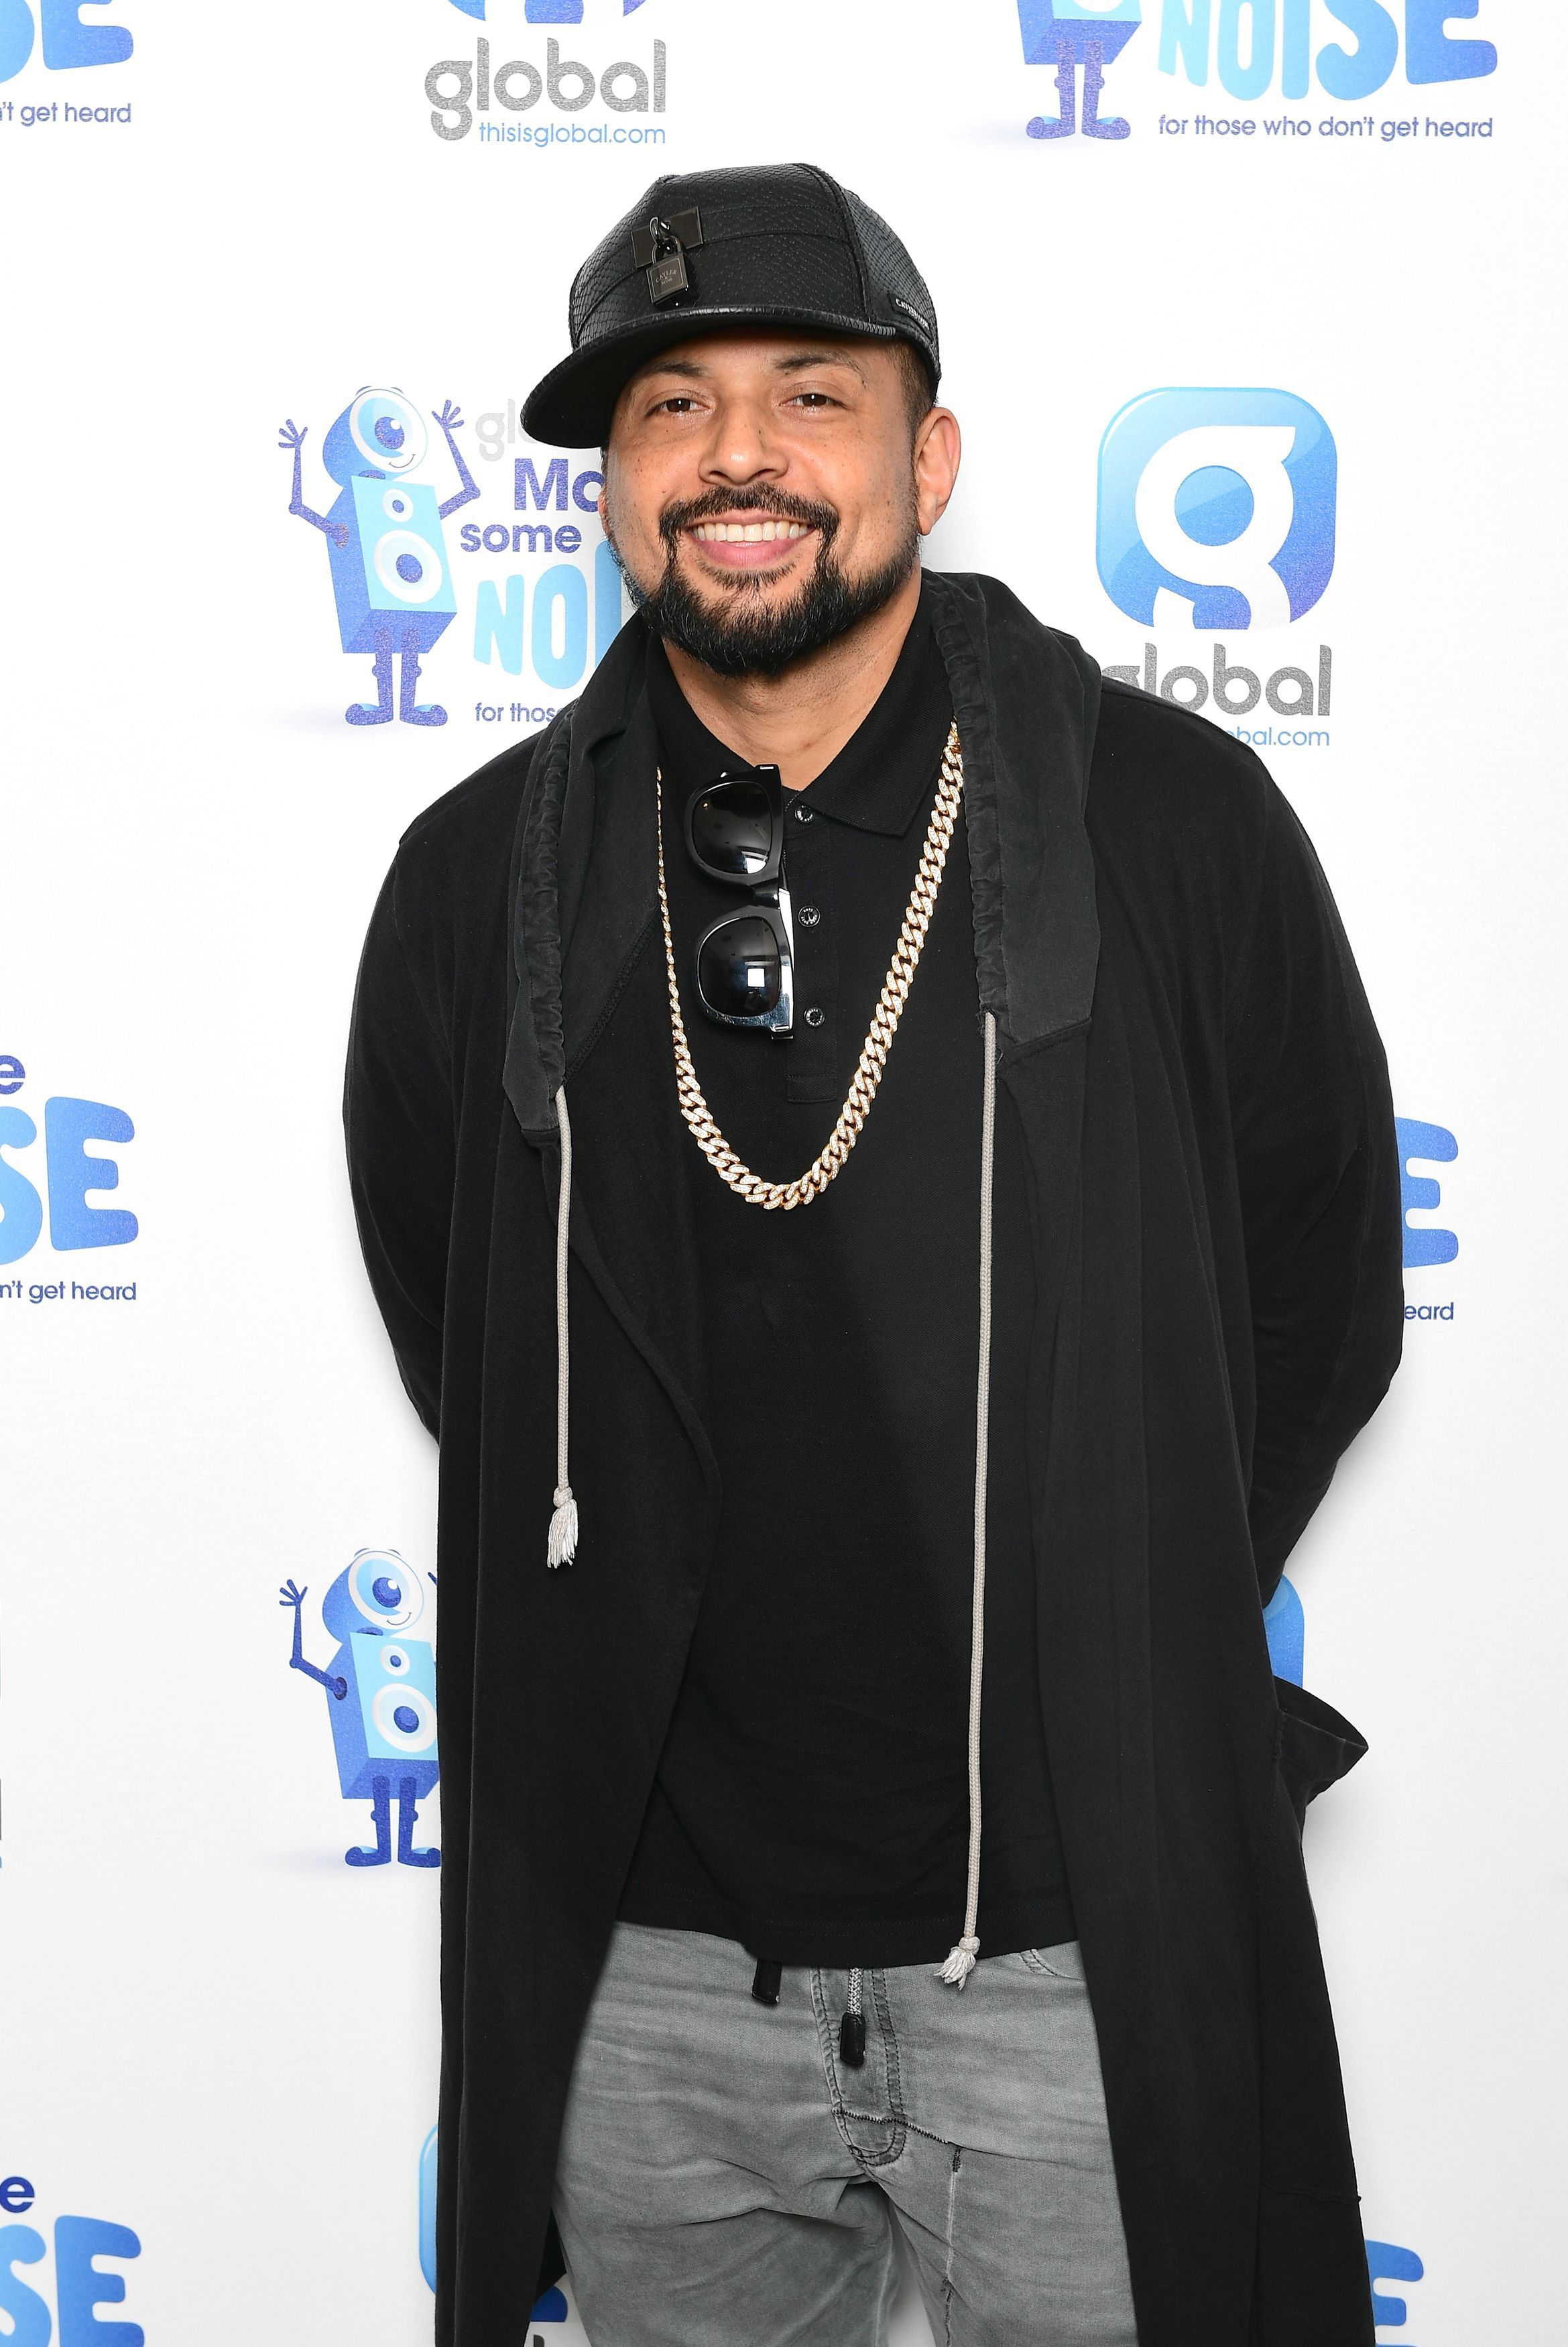 Sean Paul supporting Global's Make Some Noise Day â the charity set up by Global, the media and entertainment group, to help disadvantaged youngsters across the UK, held at Global Radio, London.